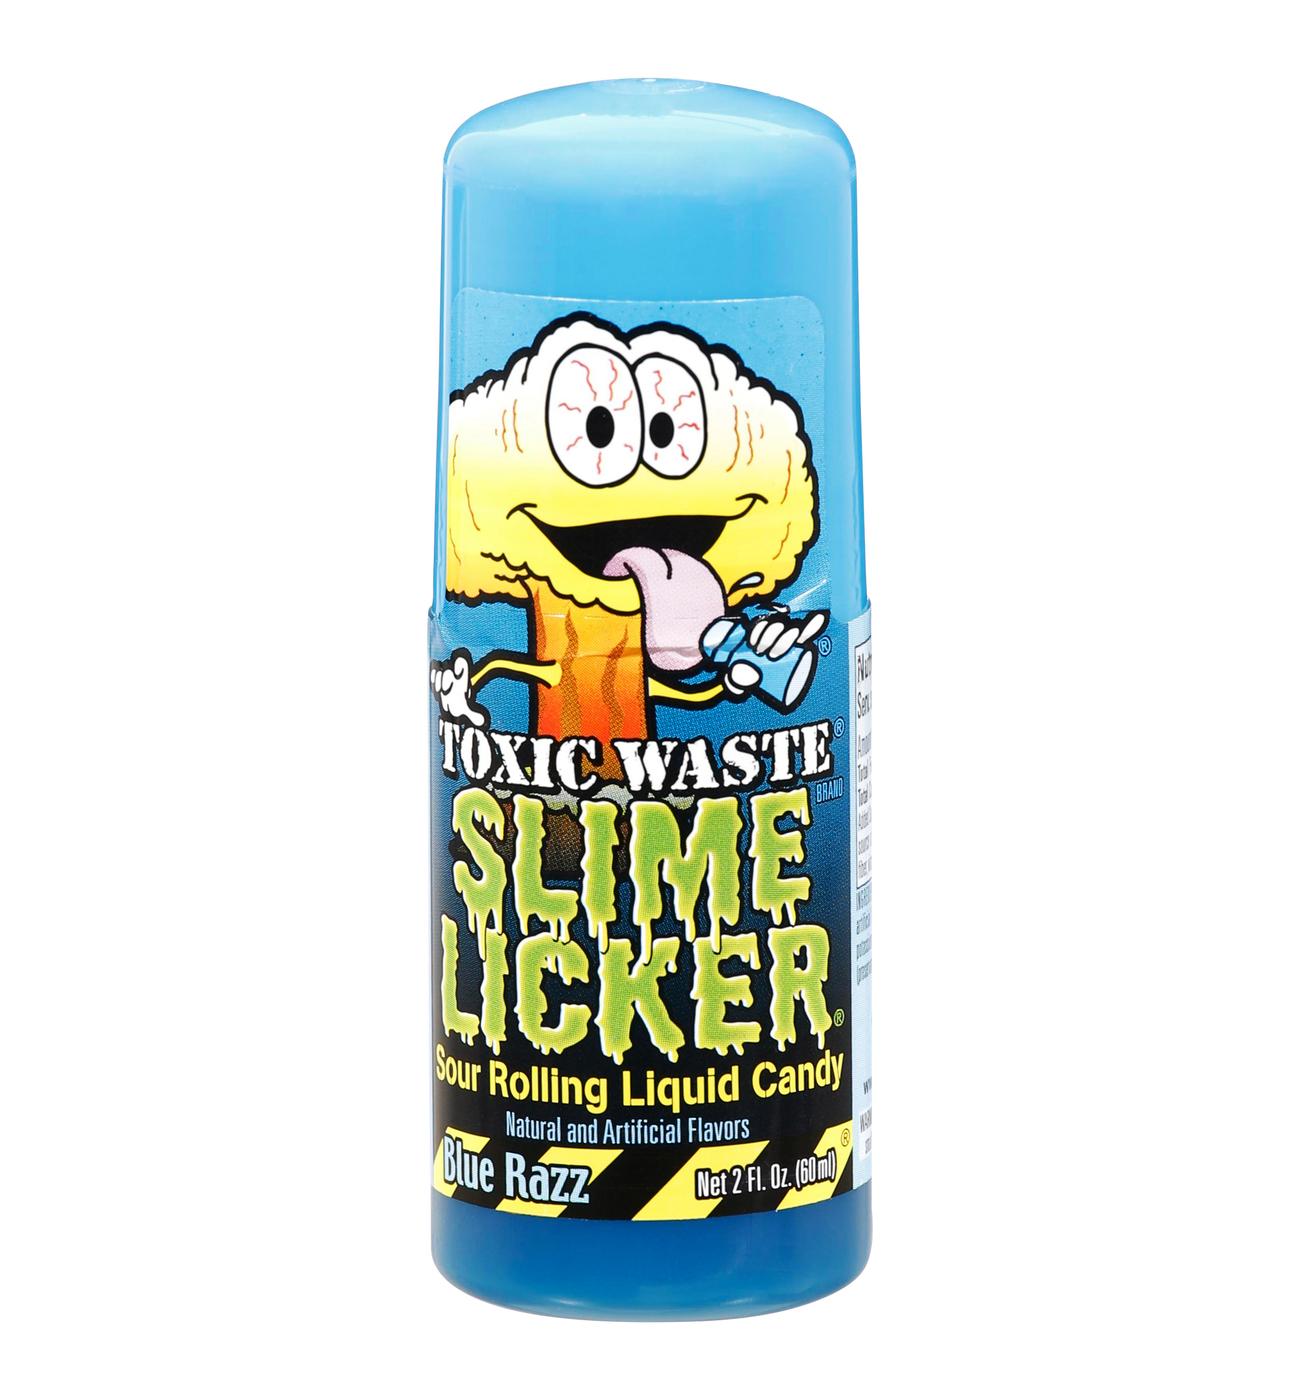 Toxic Waste Slime Licker Sour Rolling Liquid Candy, Assorted; image 2 of 3